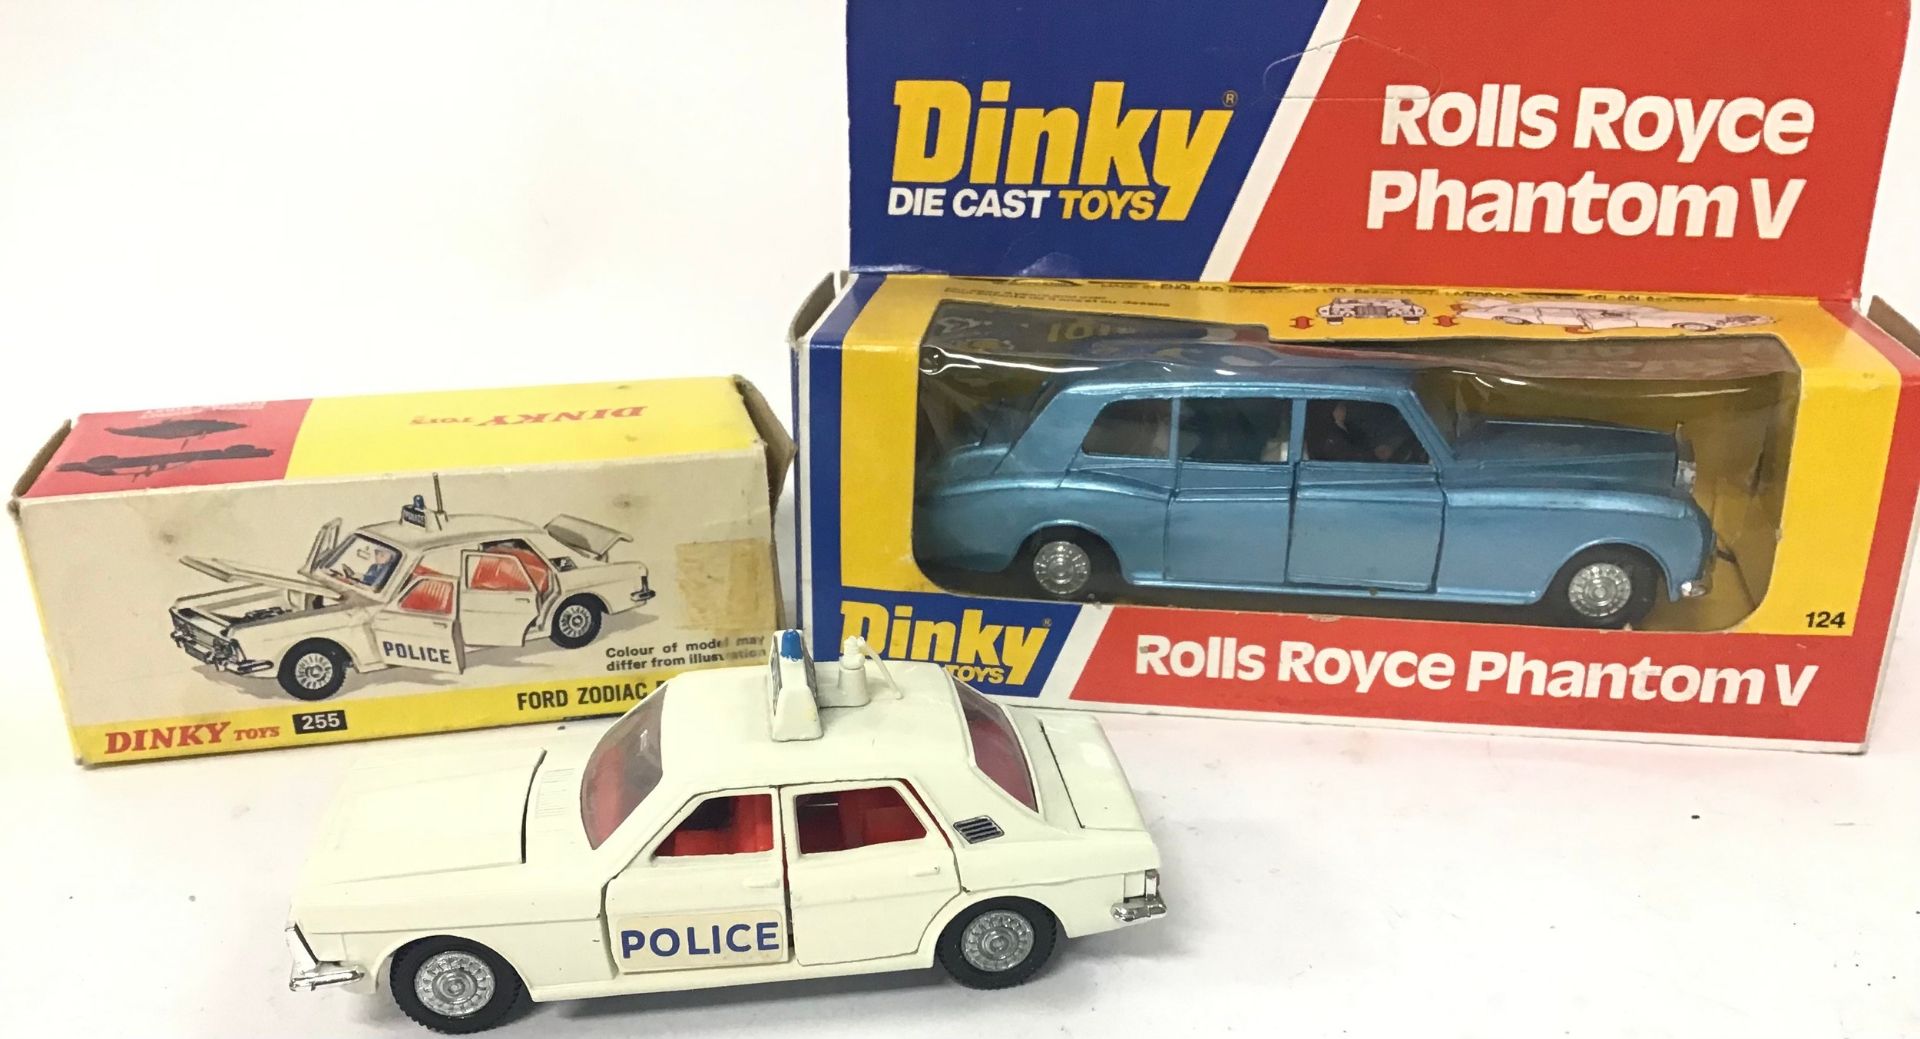 2 Dinky Models: 255 Ford Zodiac "Police" Car - off-white, red interior with figure driver, chrome